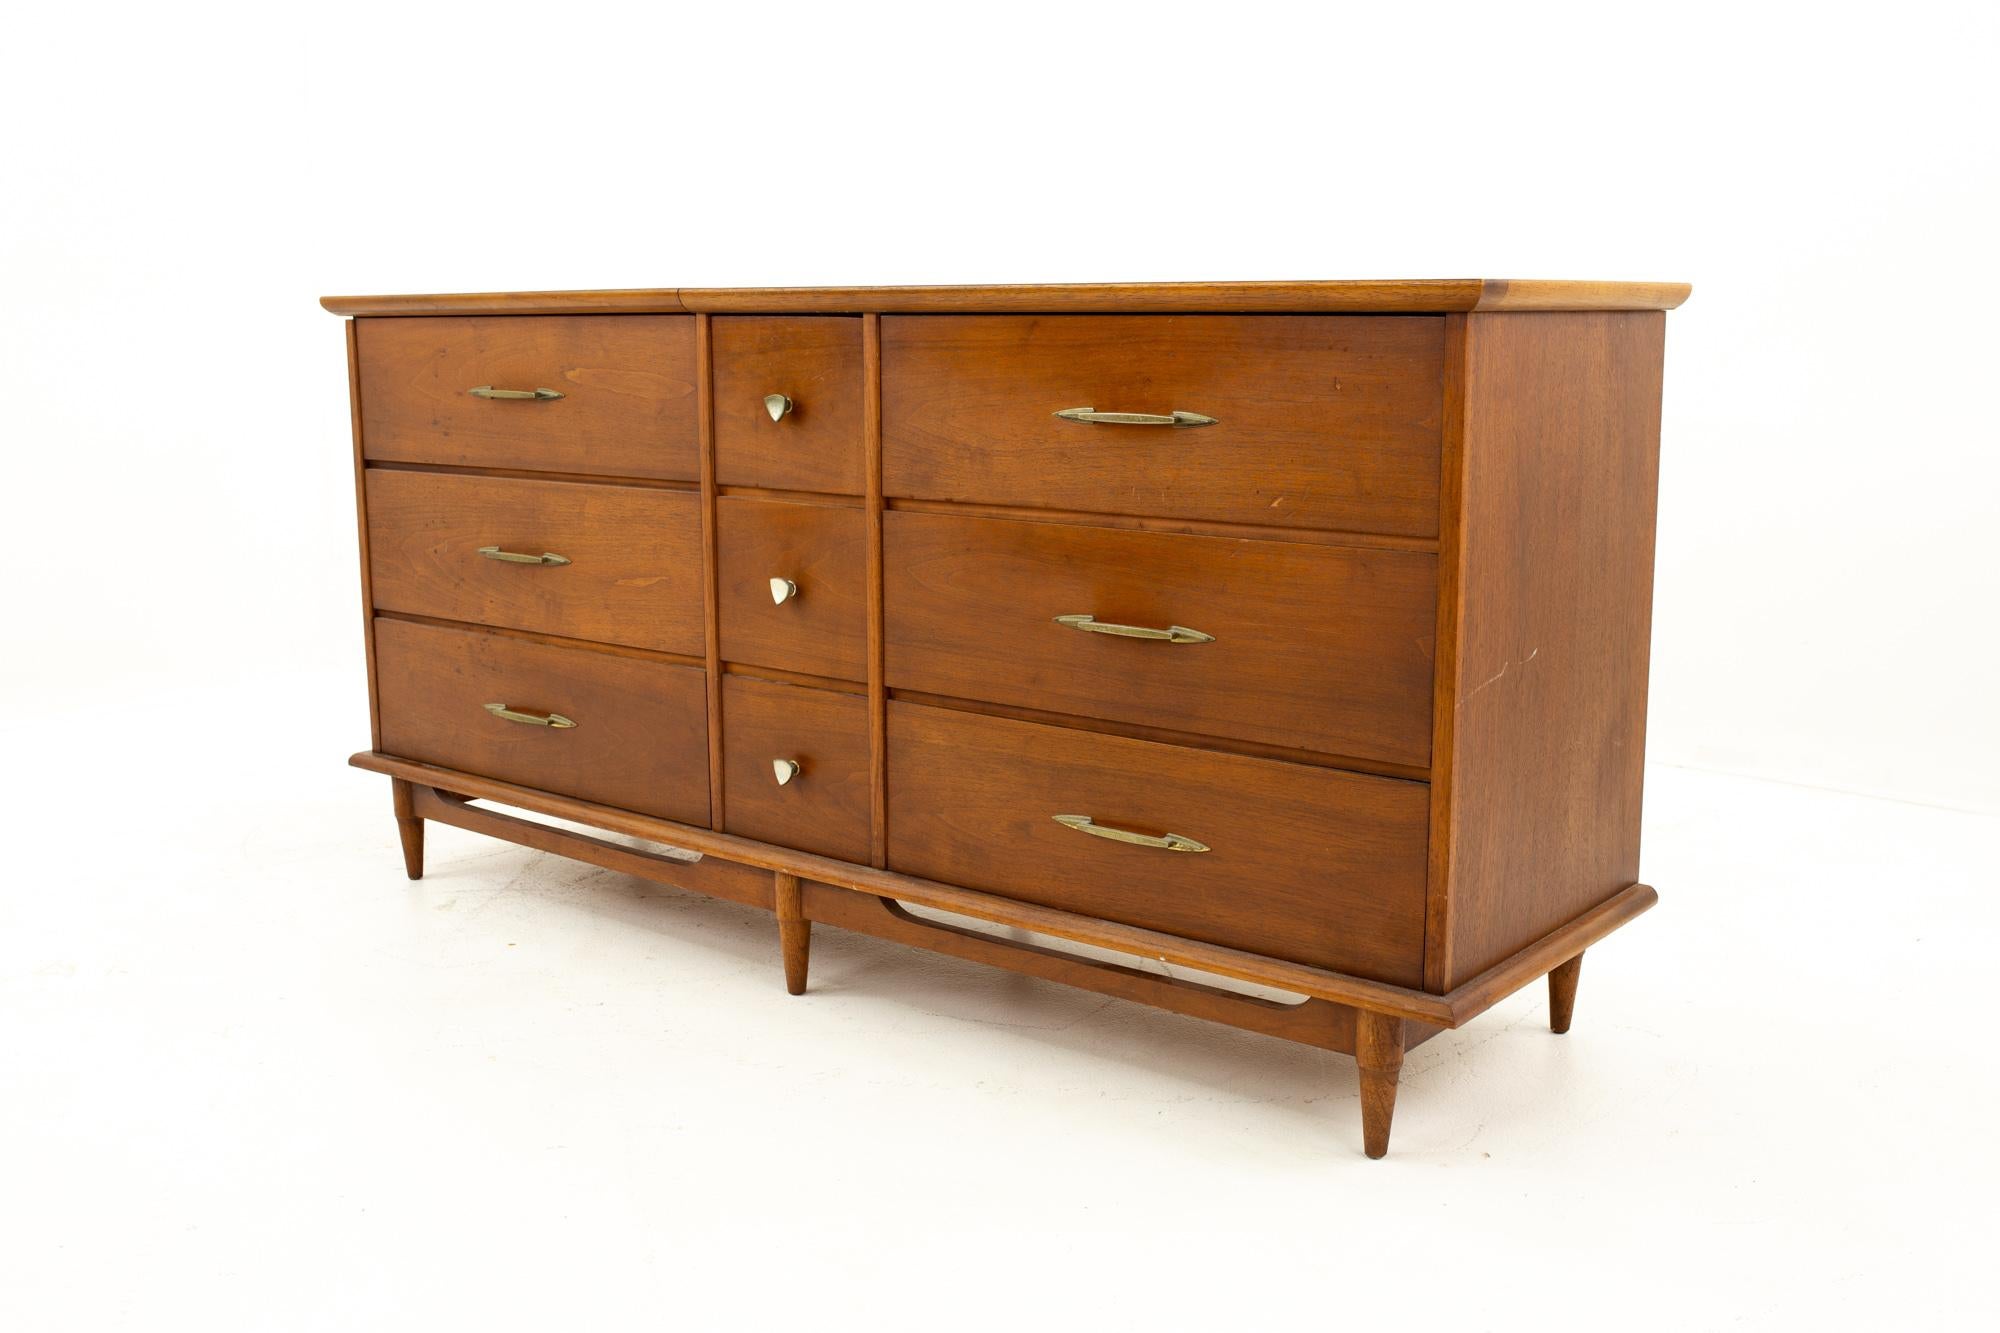 Lane Mid Century lowboy dresser with built in cedar chest

Dresser measures: 66 wide x 19 deep x 32 high

This price includes getting this piece in what we call restored vintage condition. That means the piece is permanently fixed upon purchase so